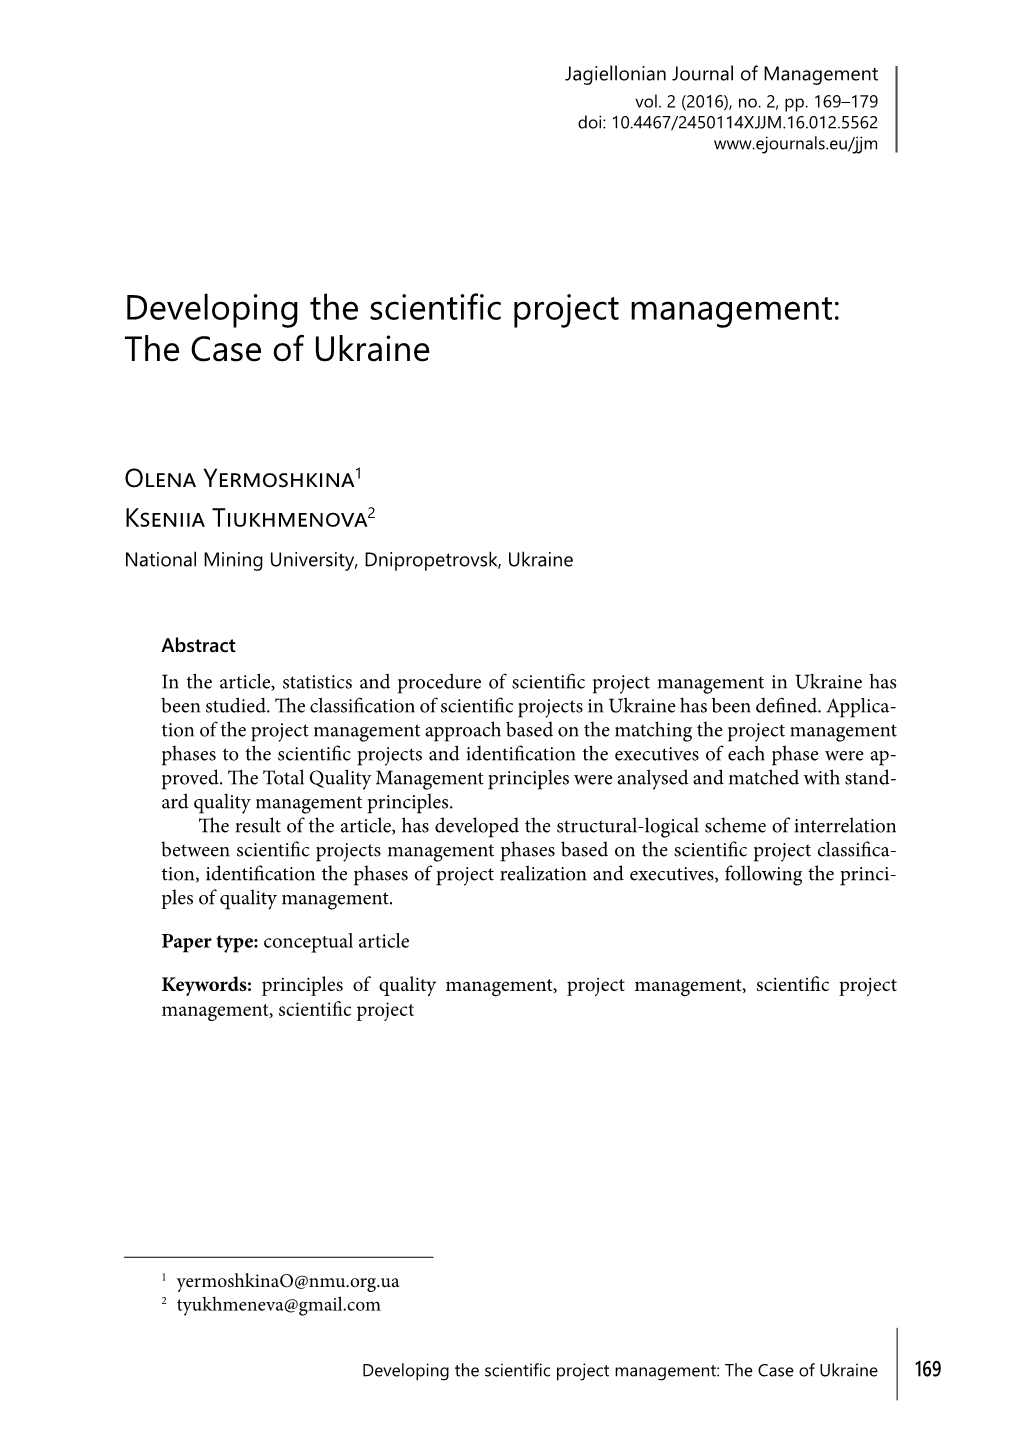 Developing the Scientific Project Management: the Case of Ukraine